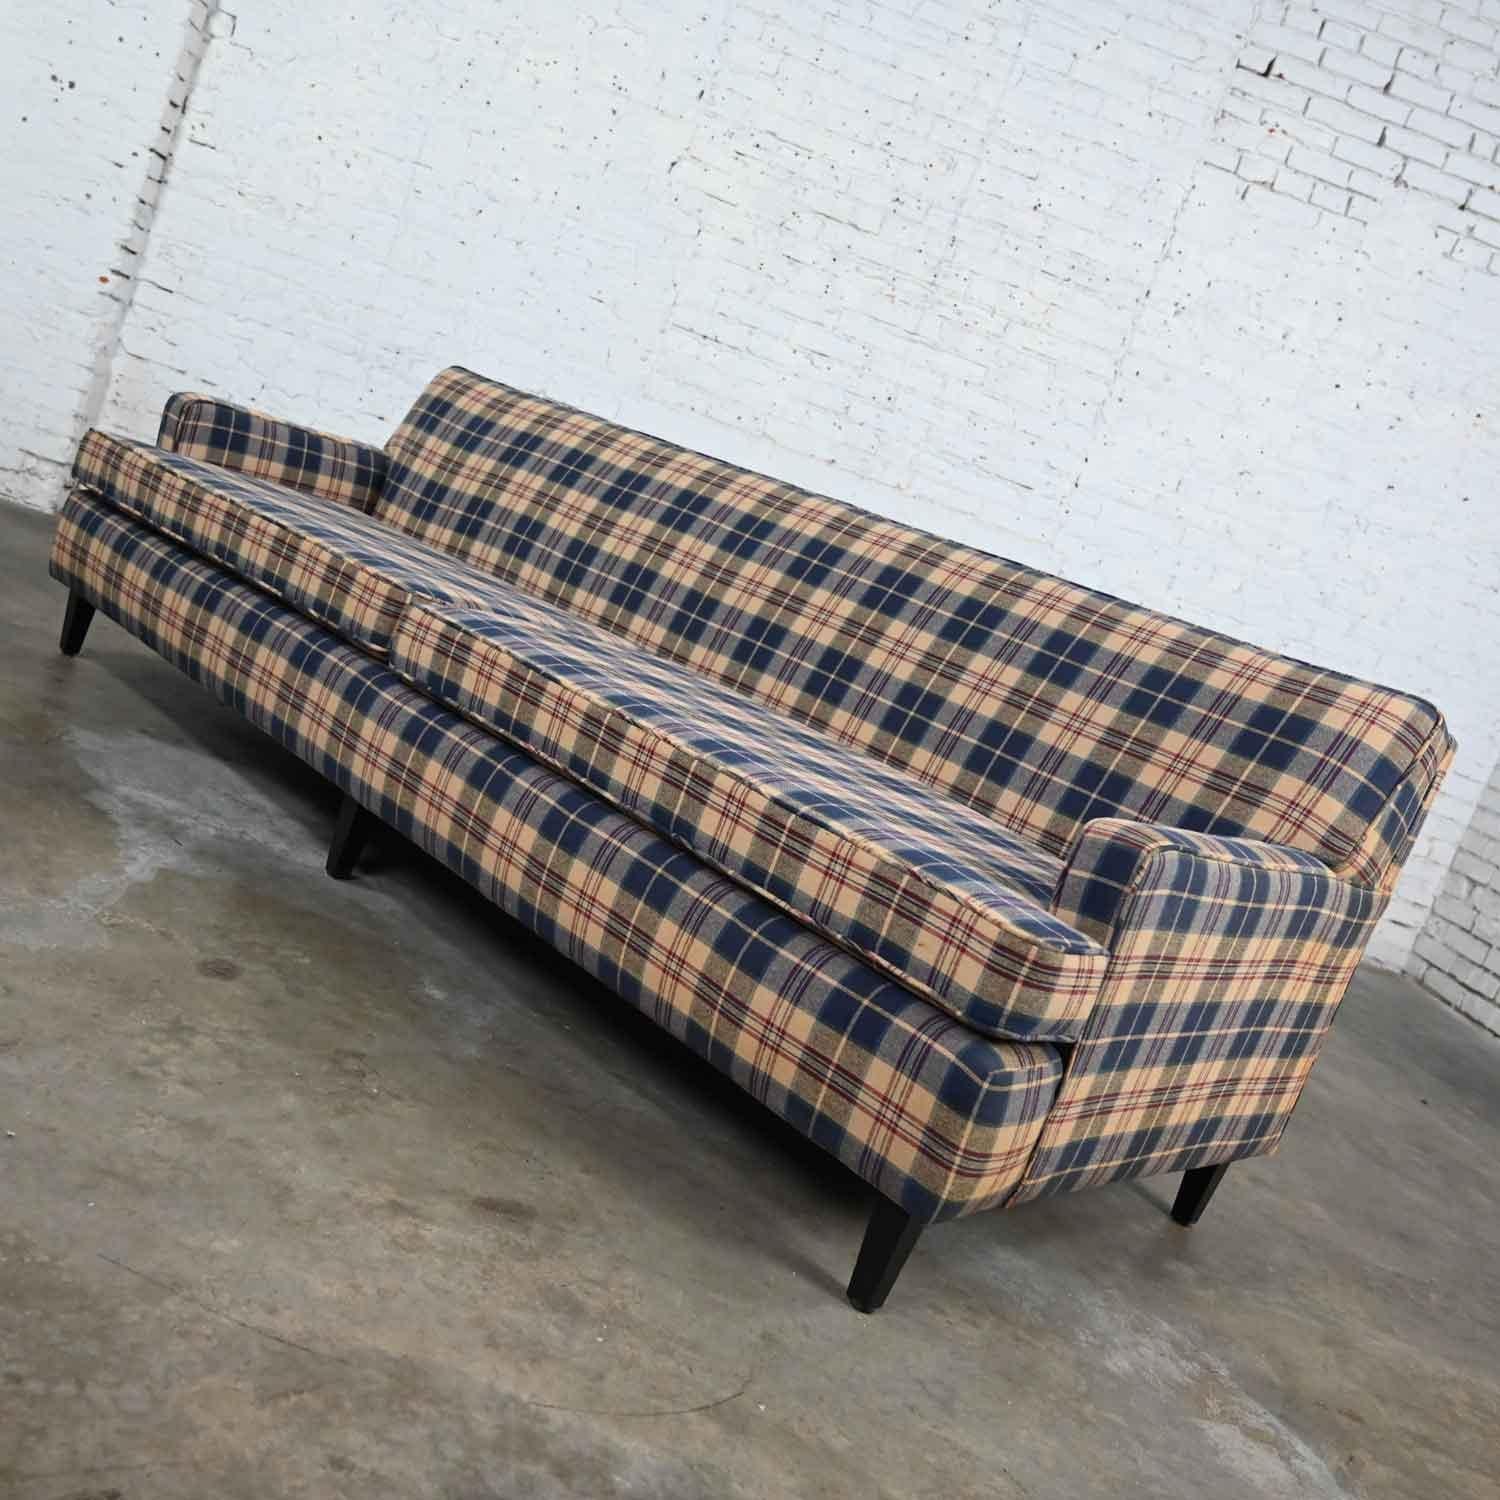 Vintage Blue Khaki Maroon & Black Plaid Lawson Style Tight Back Sofa In Good Condition For Sale In Topeka, KS